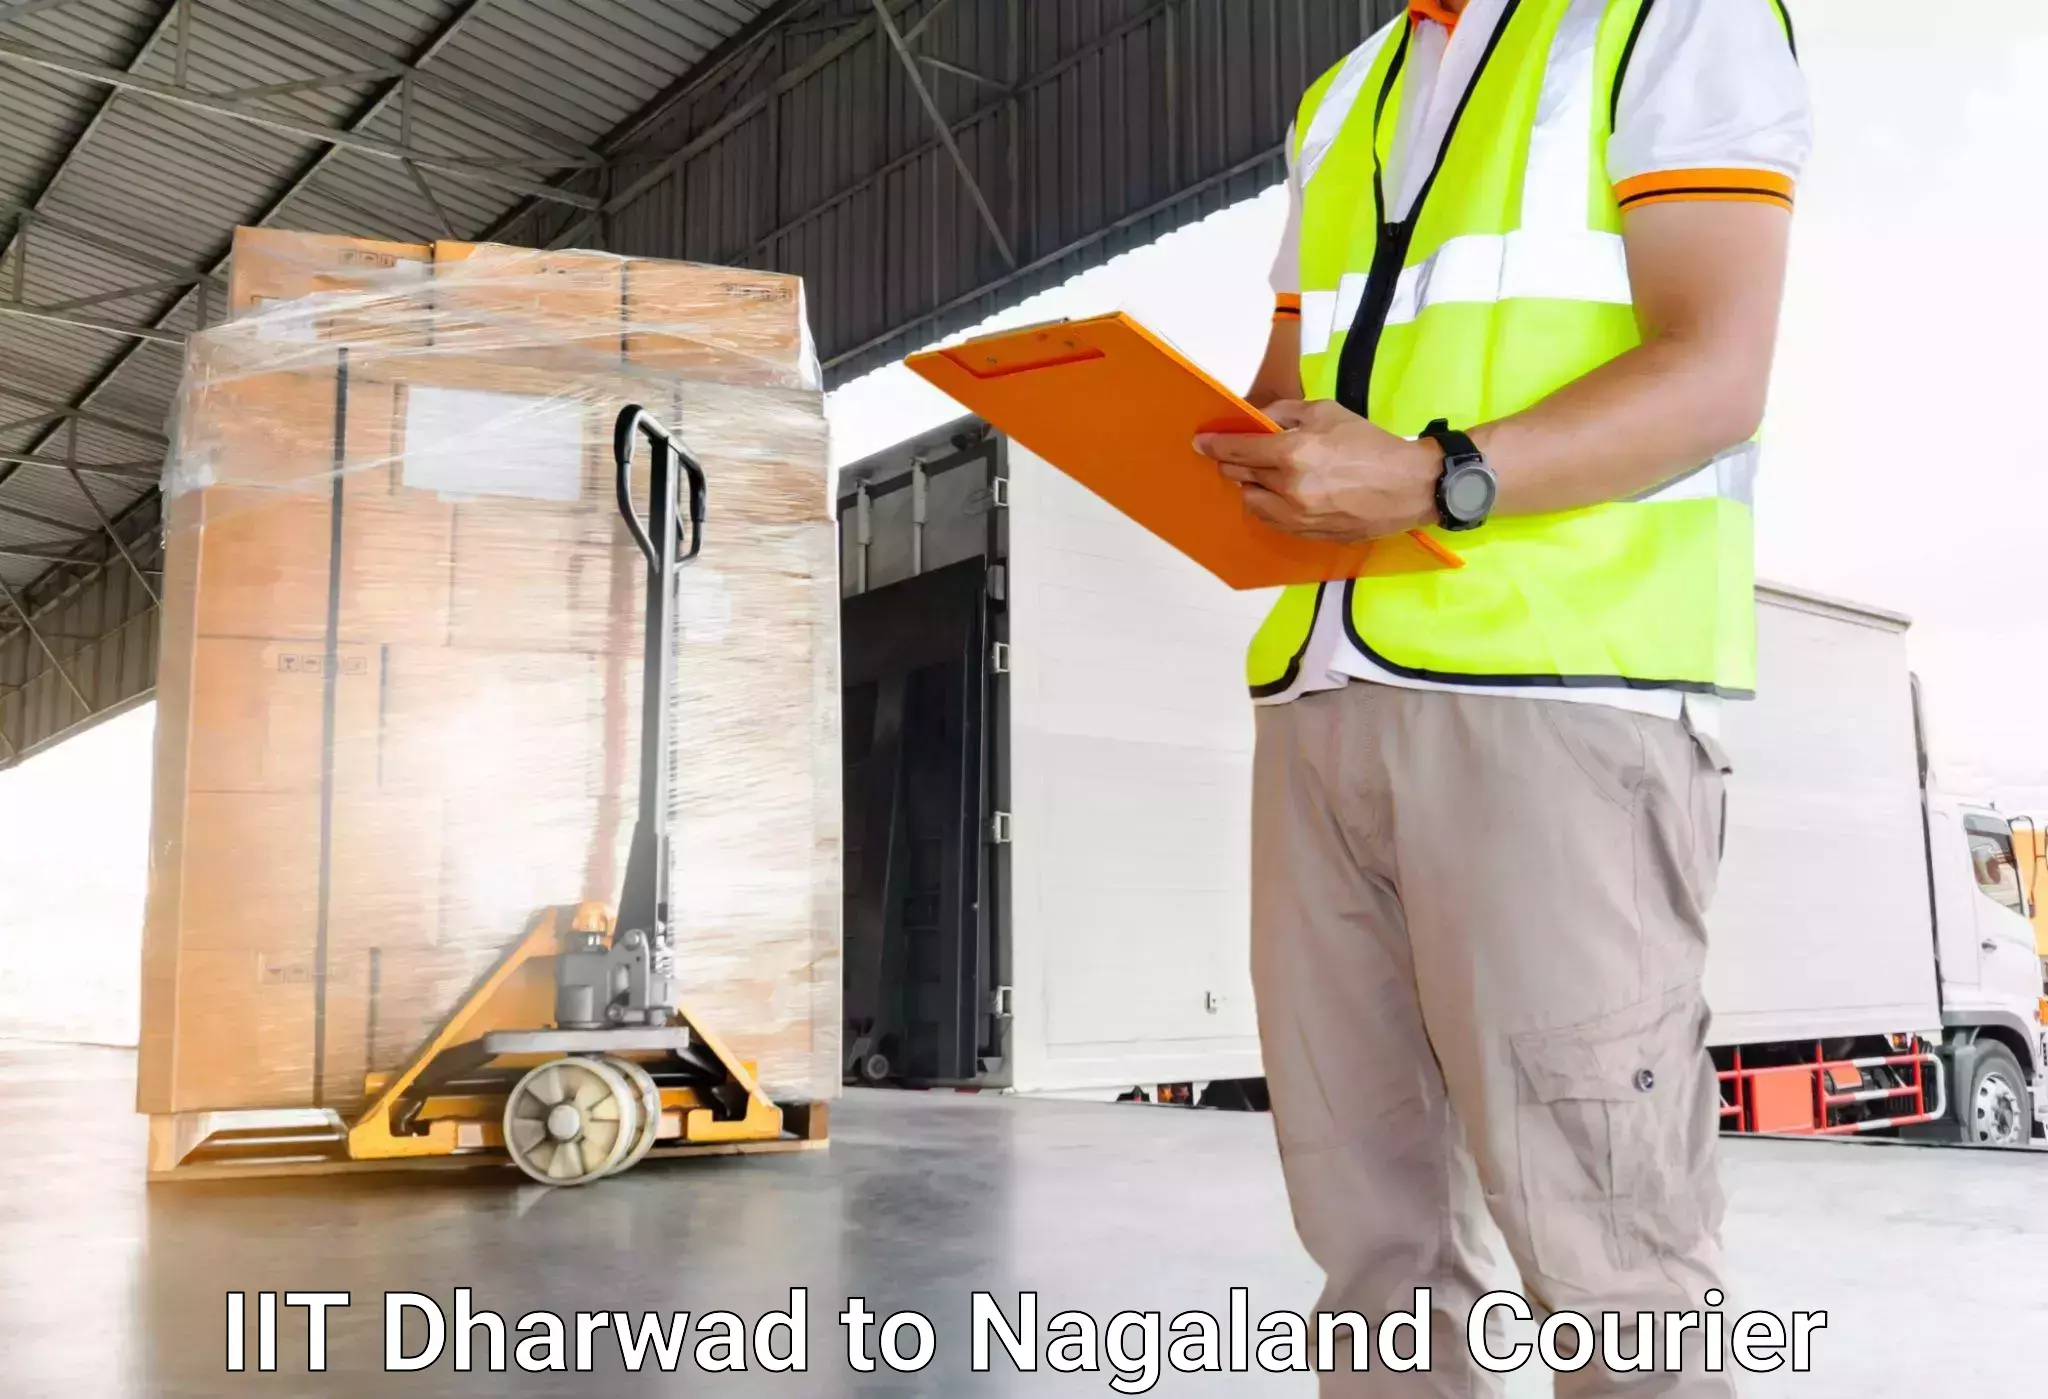 Baggage transport management IIT Dharwad to Nagaland